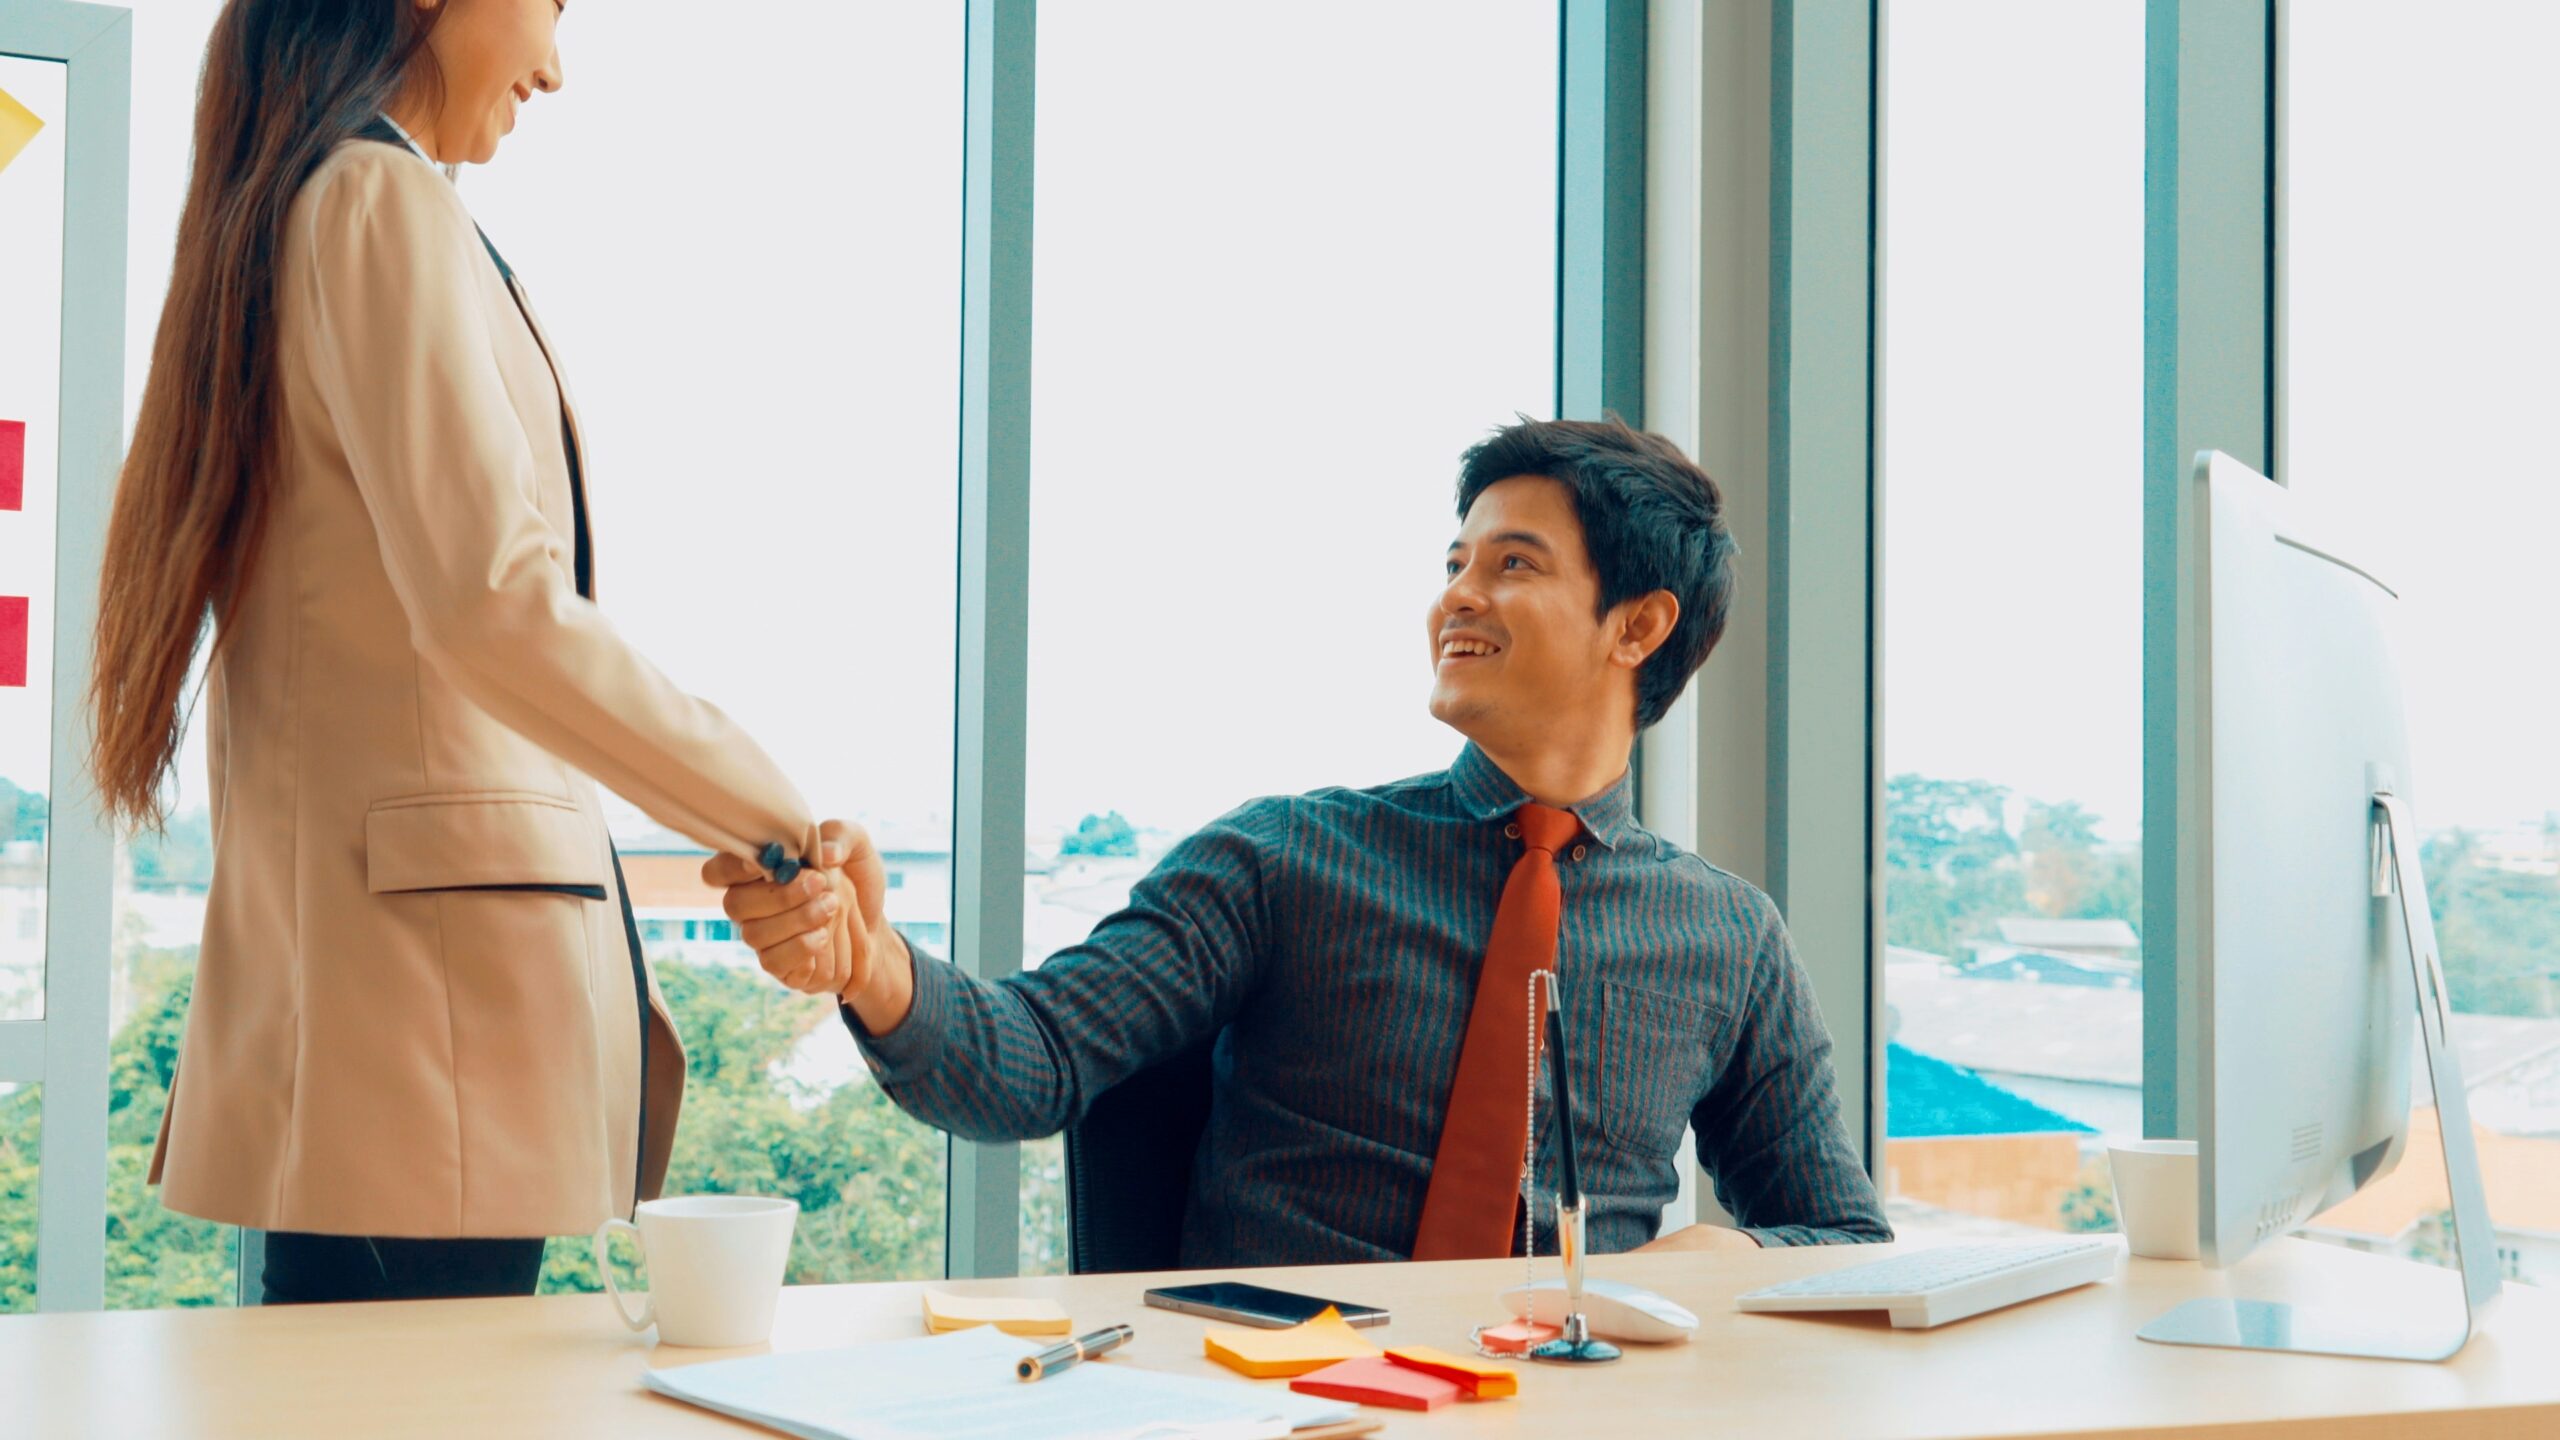 Two IT professionals shaking hands in an office setting after discussing responsibilities of managed service company.